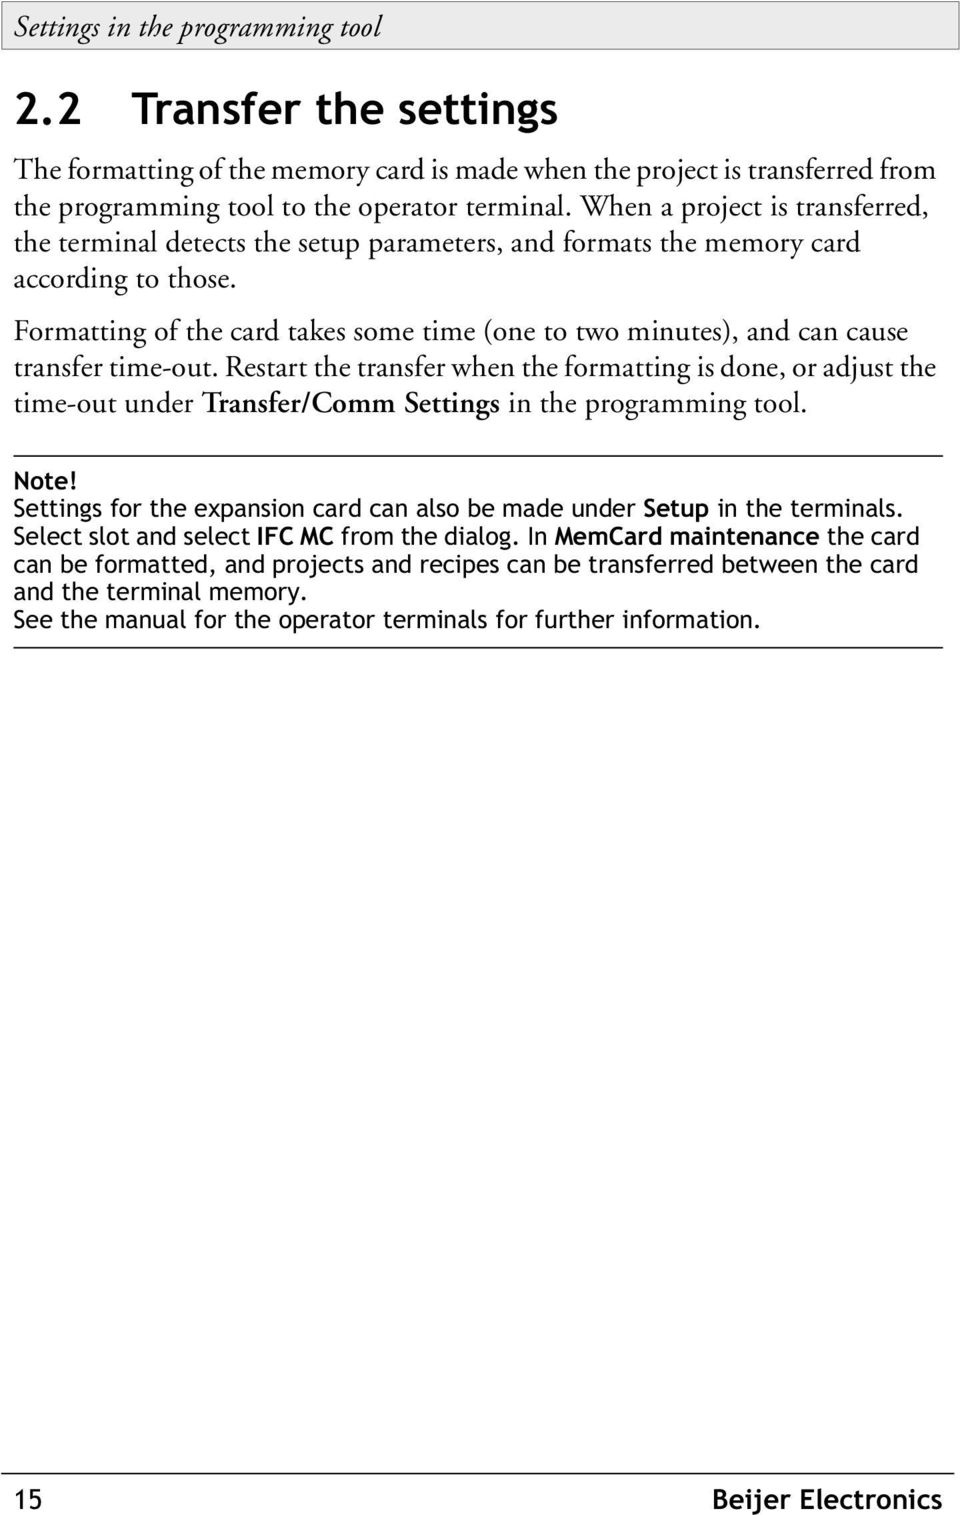 Formatting of the card takes some time (one to two minutes), and can cause transfer time-out.